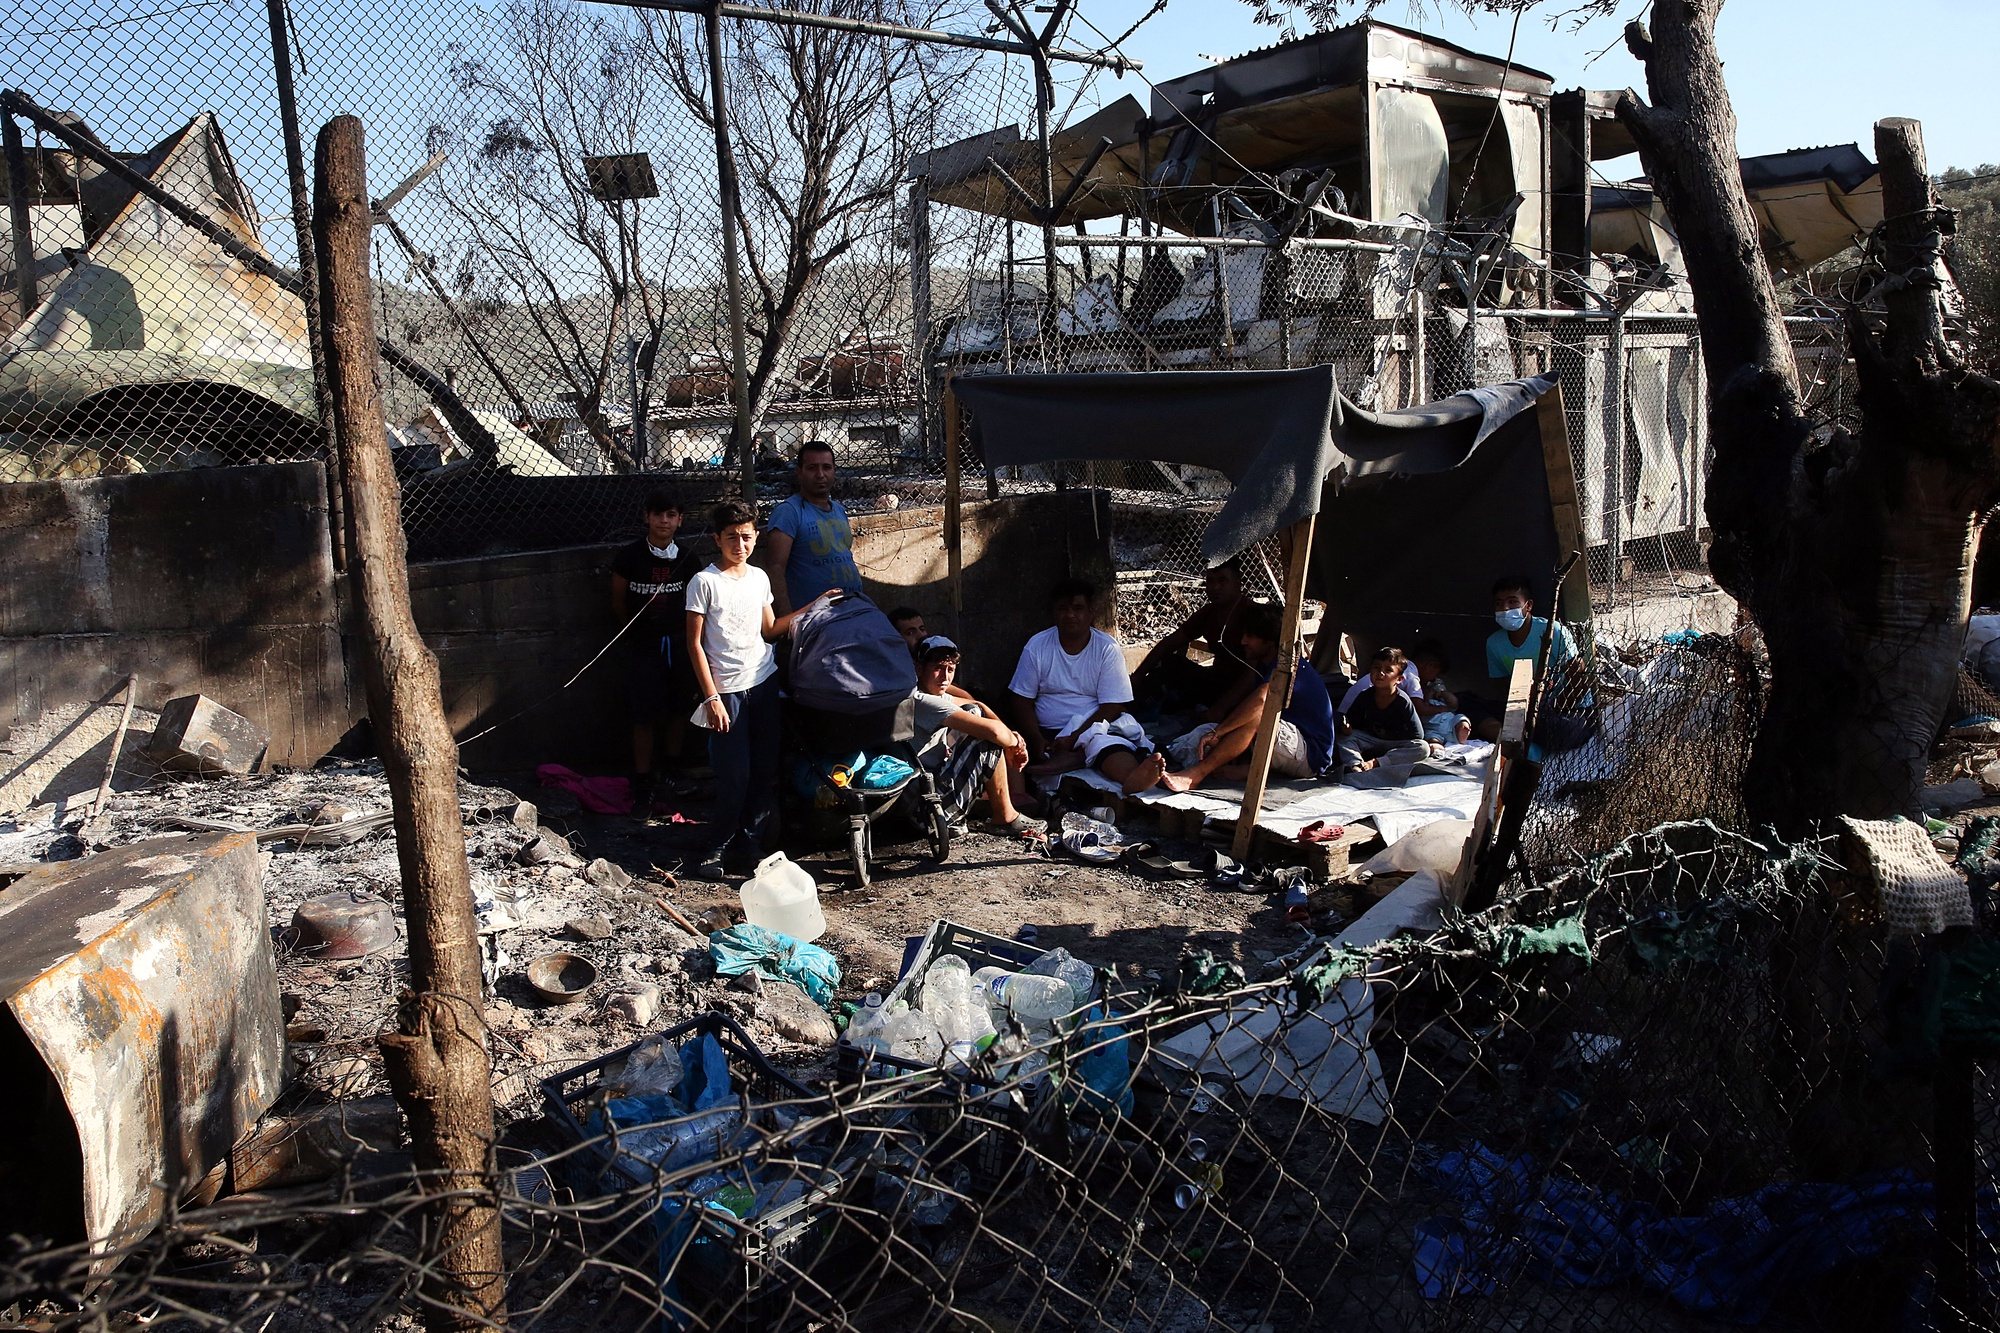 epa08656945 Asylum seekers sit among debris in the Moria refugees camp on the island of Lesbos, Greece, 09 September 2020. According to reports, a fire broke out at Moria Camp early on 09 September, after approximately 35 refugees, who had tested positive for COVID-19, refused to move into isolation with their families.  EPA/ORESTIS PANAGIOTOU